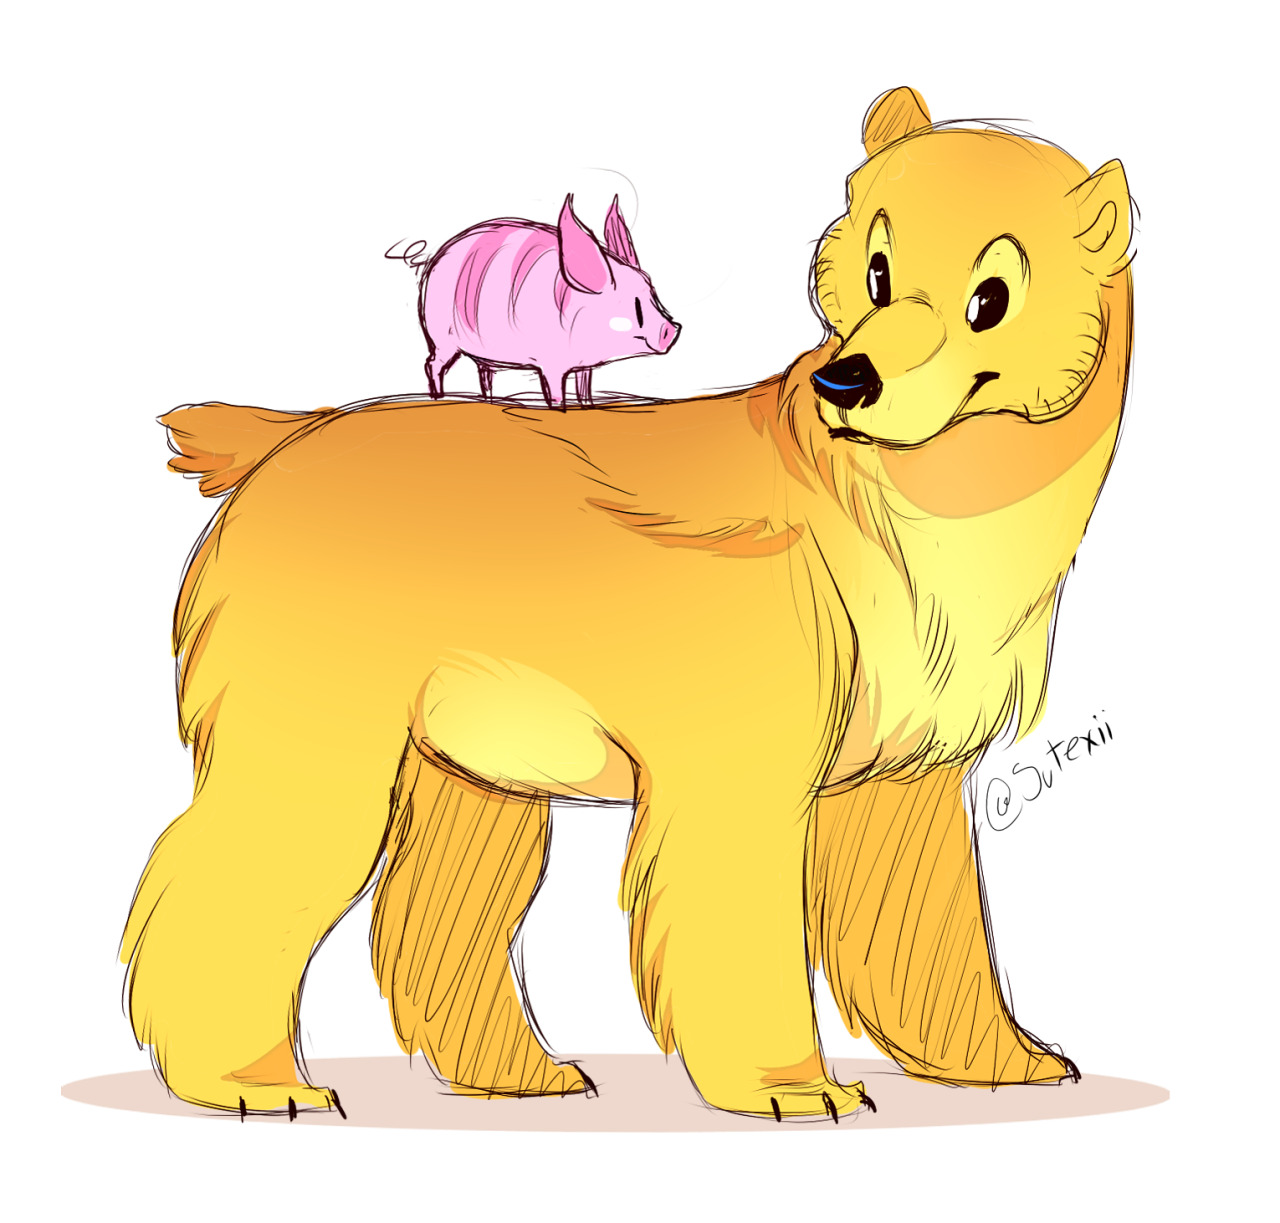 victroladoll:
“ captainalbertalexander:
“ sutexii:
“ pooh-bear and piglet ❤
”
holy shit
”
THIS IS MY NEW FAVORITE THING EVER!!
”